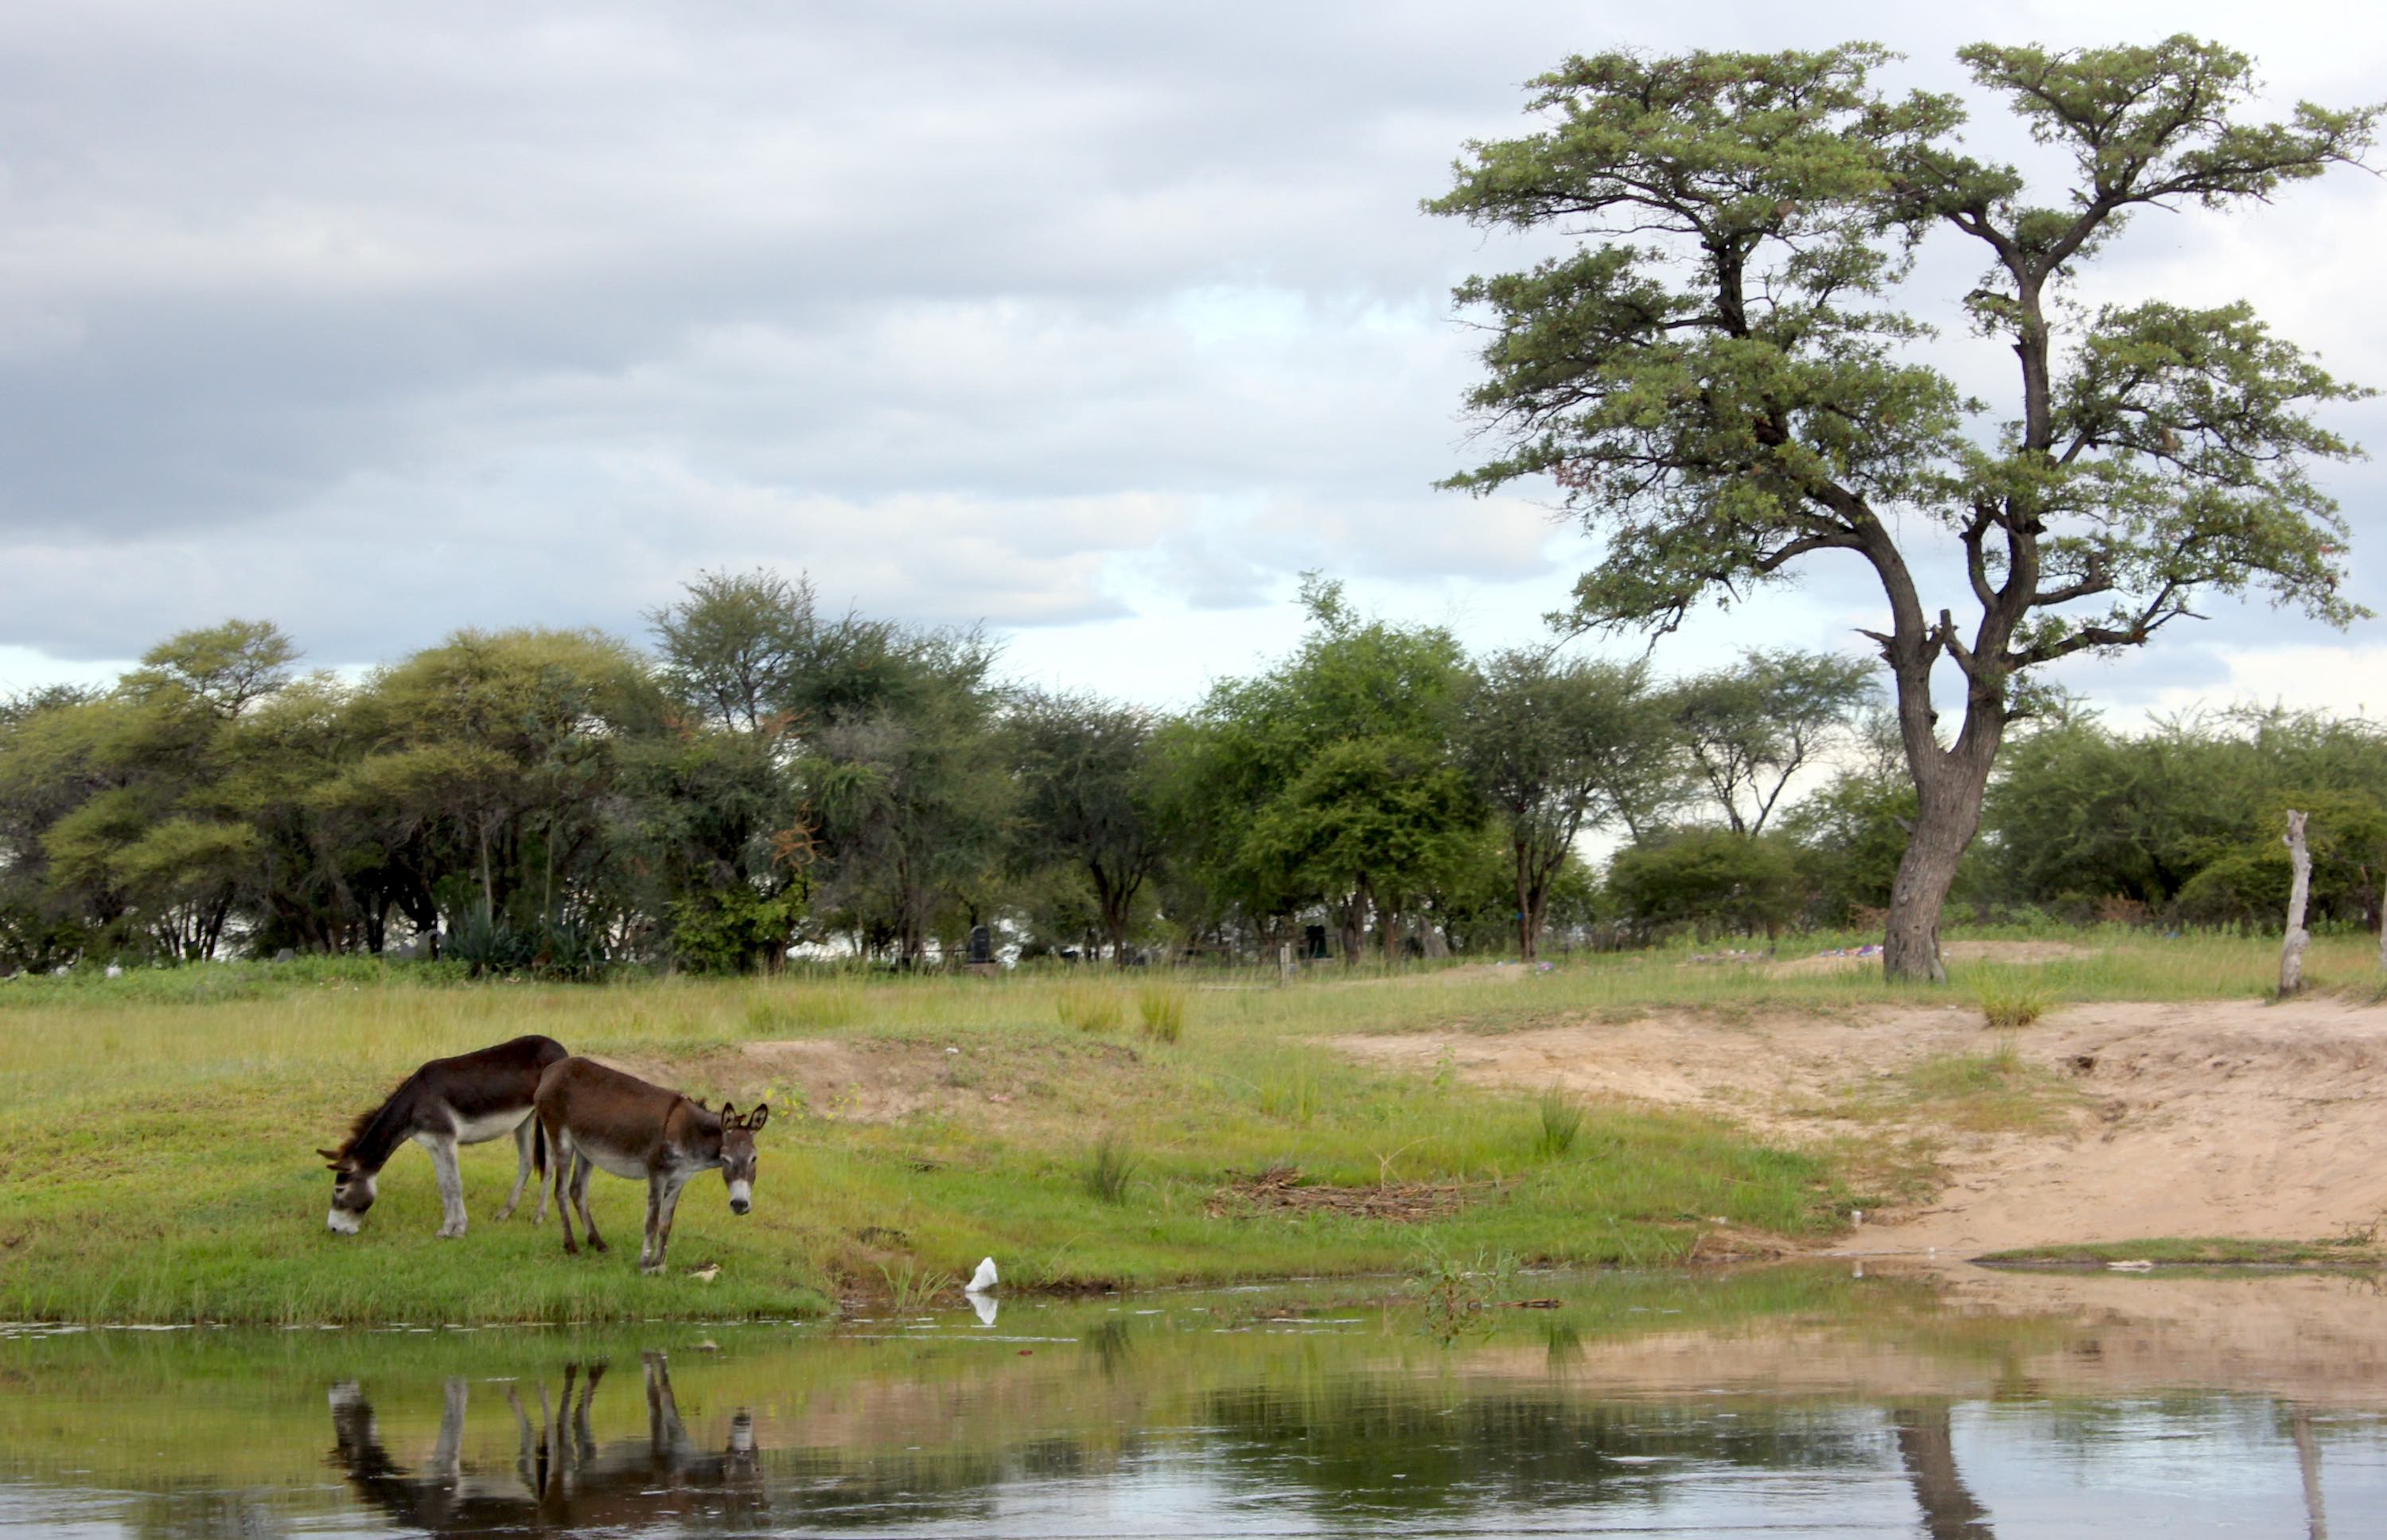 A pair of donkeys grazing on the river bank. Behind then a tall tree dominates the scene.